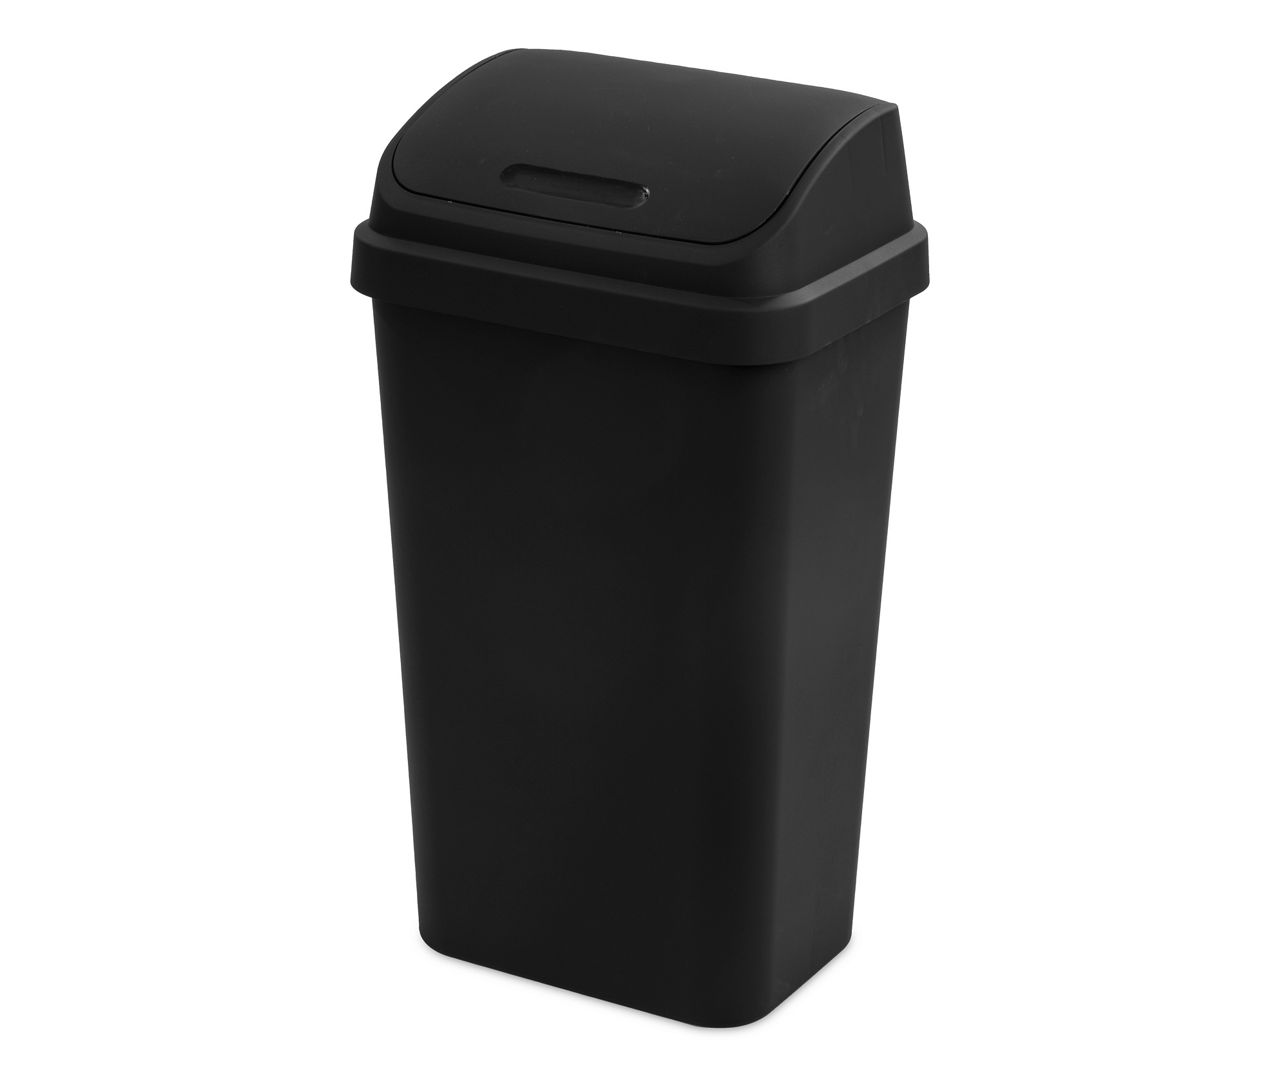 Large Trash Can - 44 Gal - One Stop Party